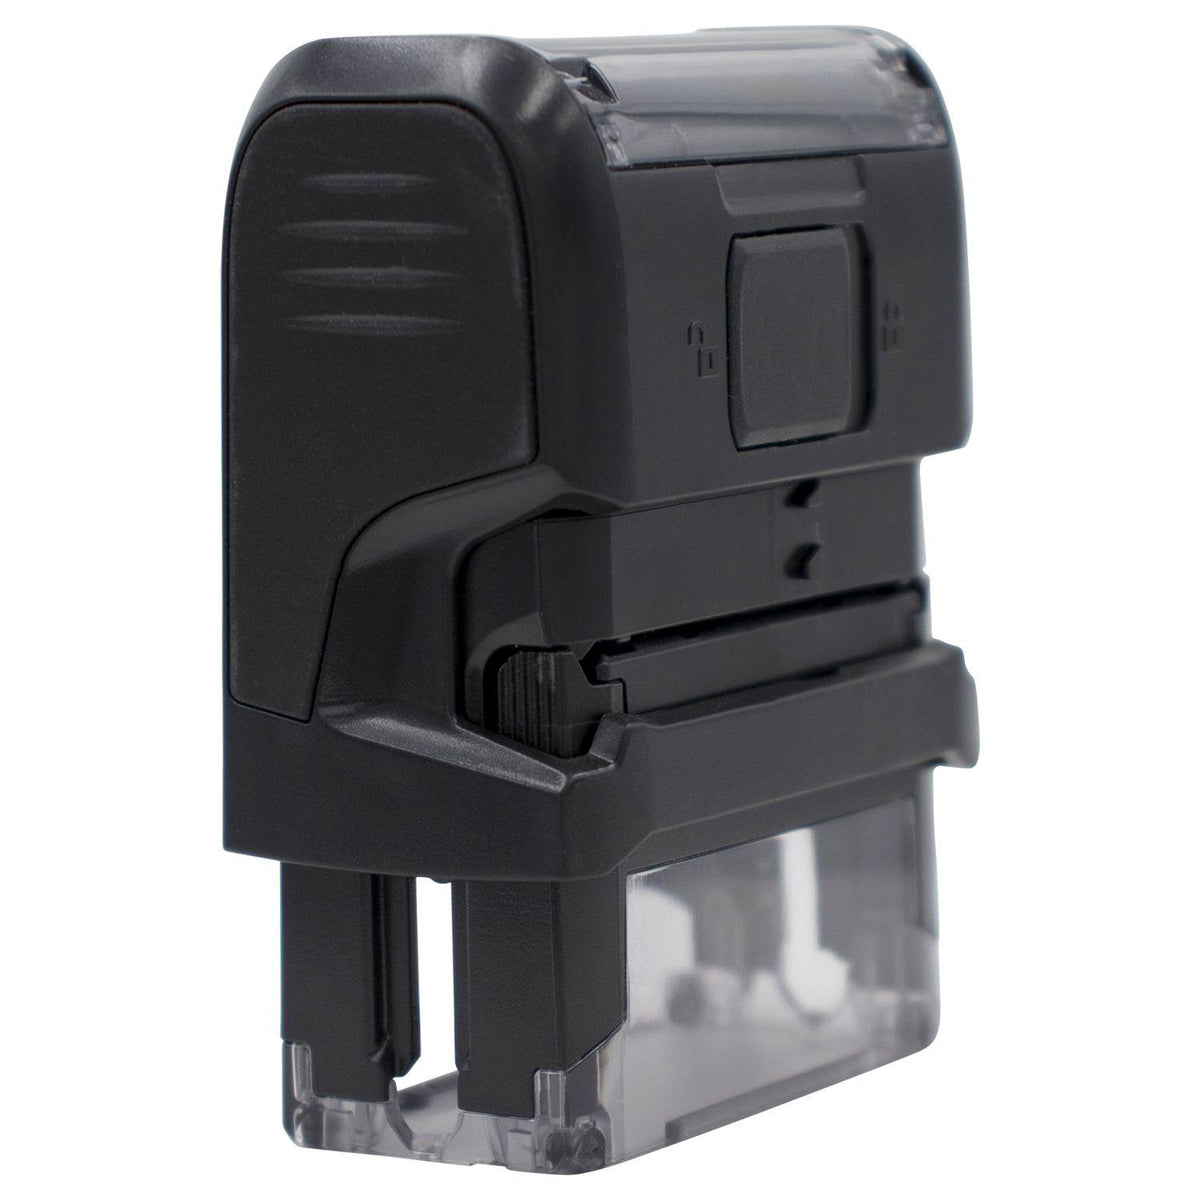 Large Self Inking Account Closed Stamp Back View